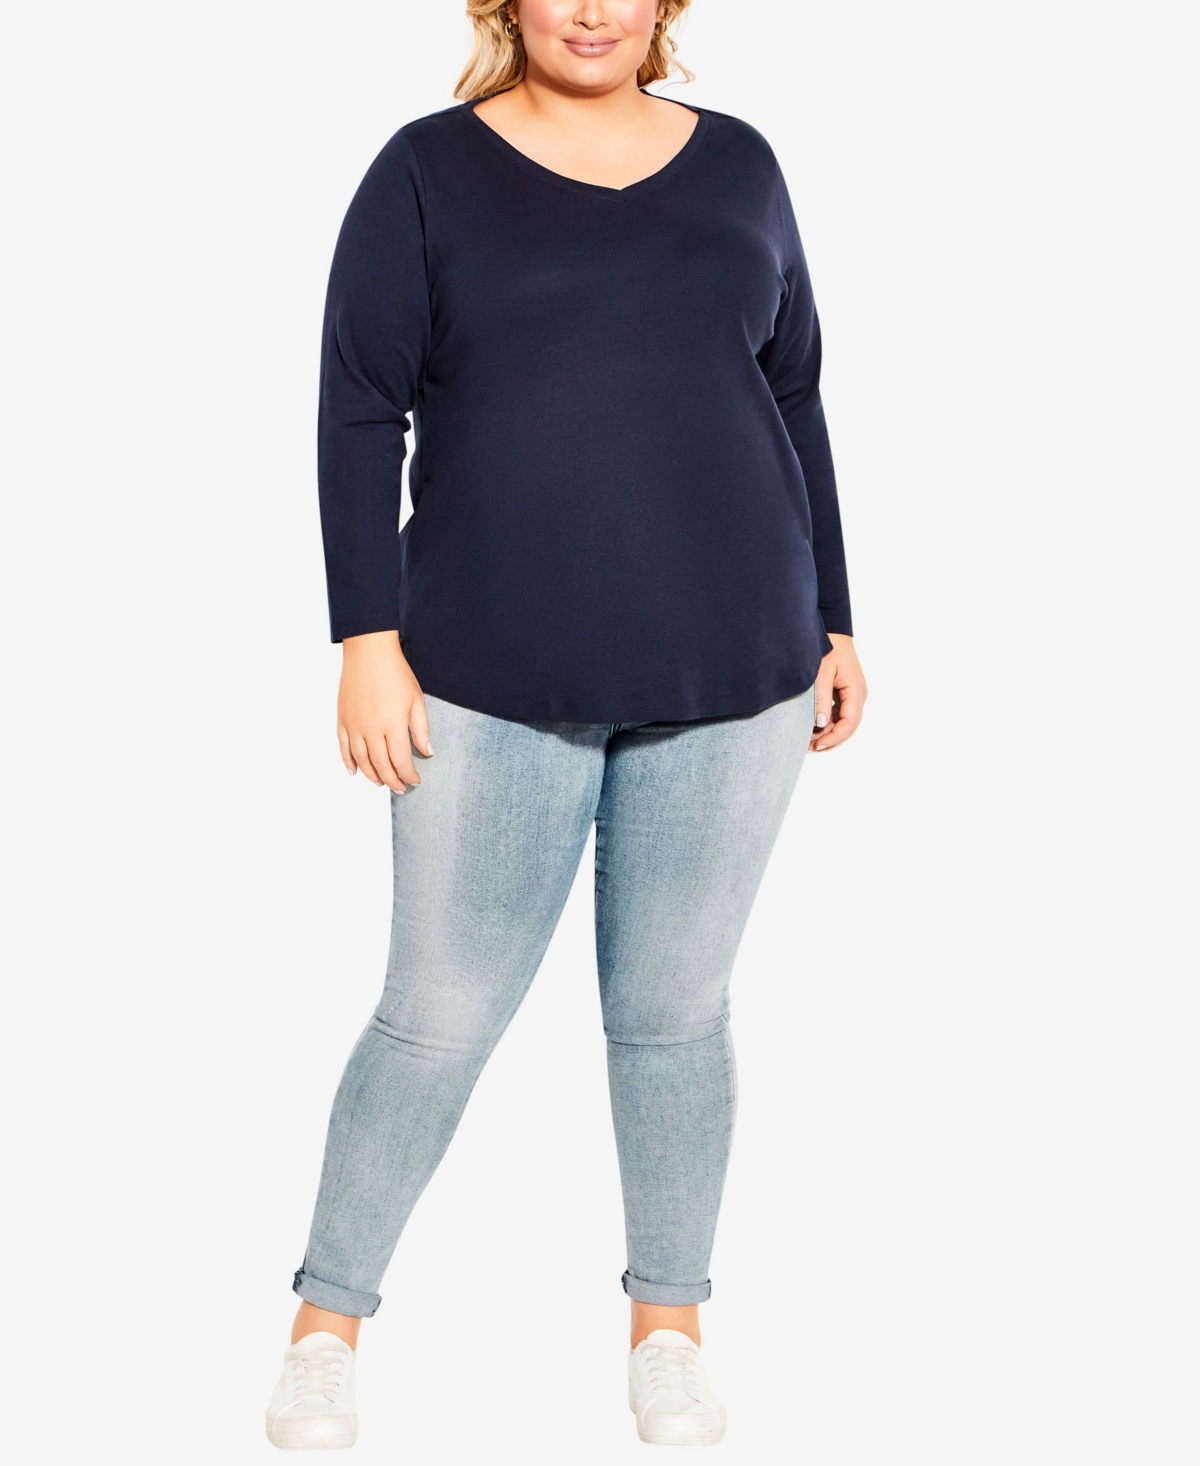 Plus Size V-Neck Essential Long Sleeve T-shirt - Navy